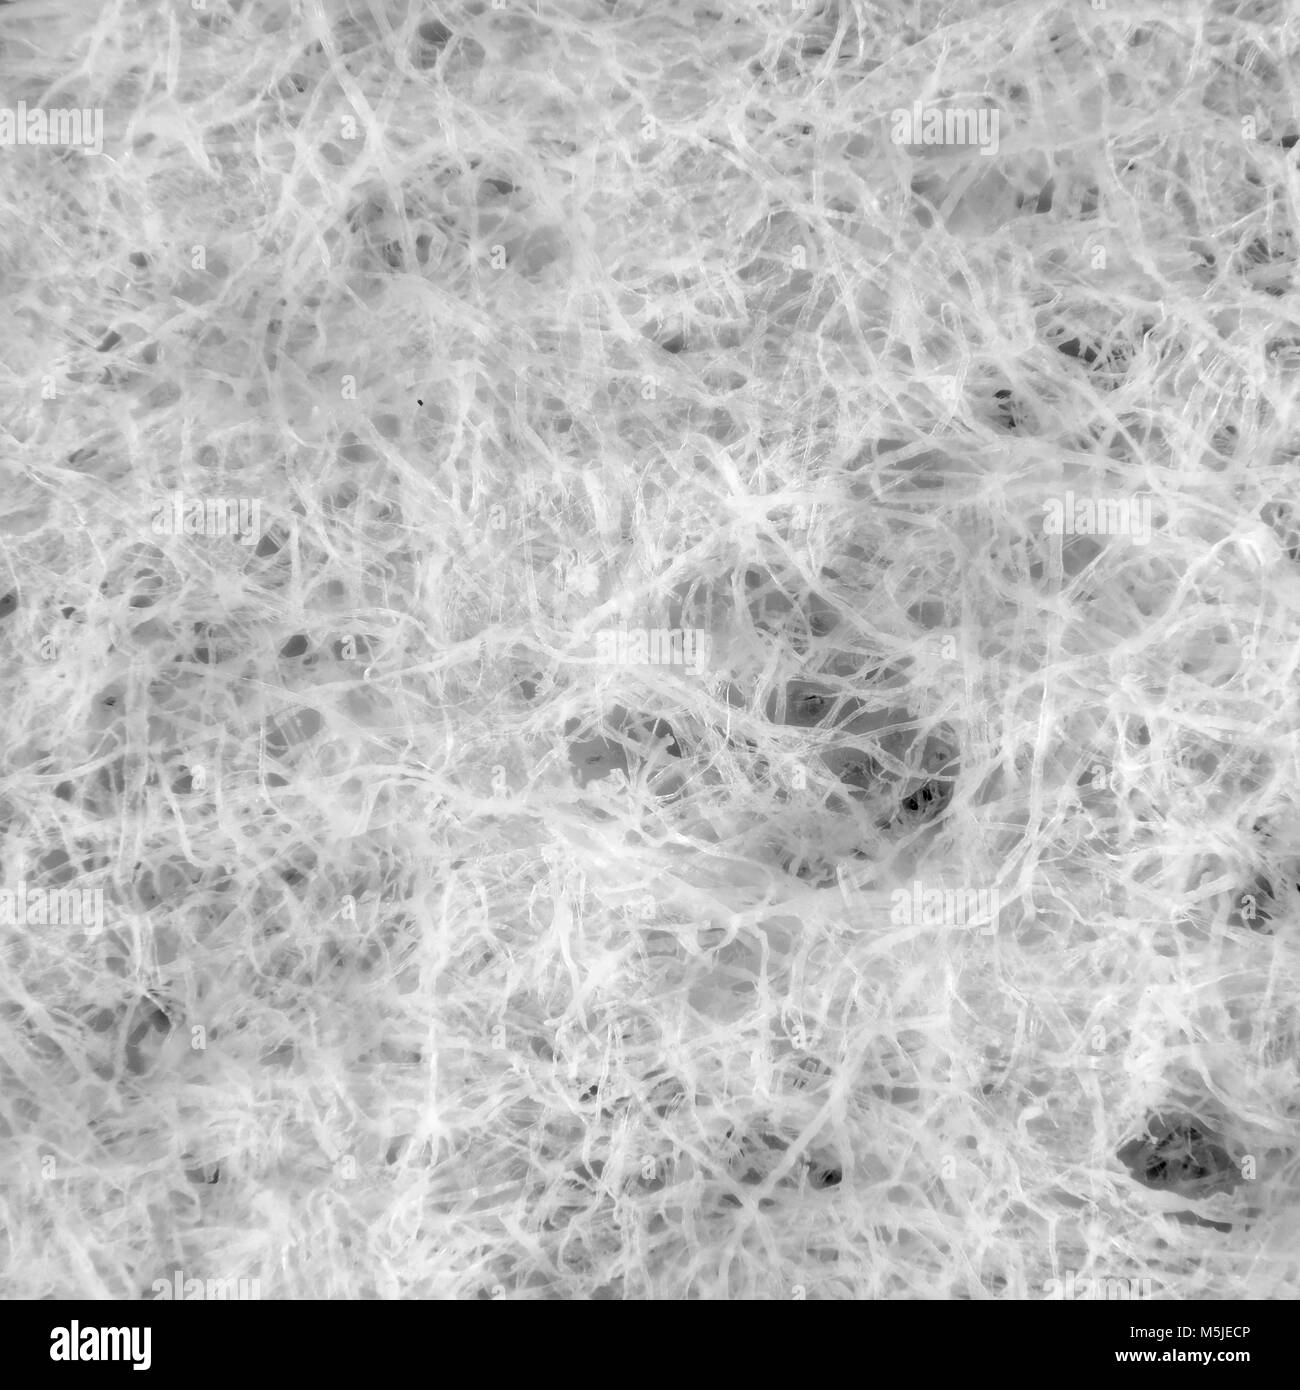 Embossed paper towel, light micrograph, pictured area is about 3mm wide Stock Photo